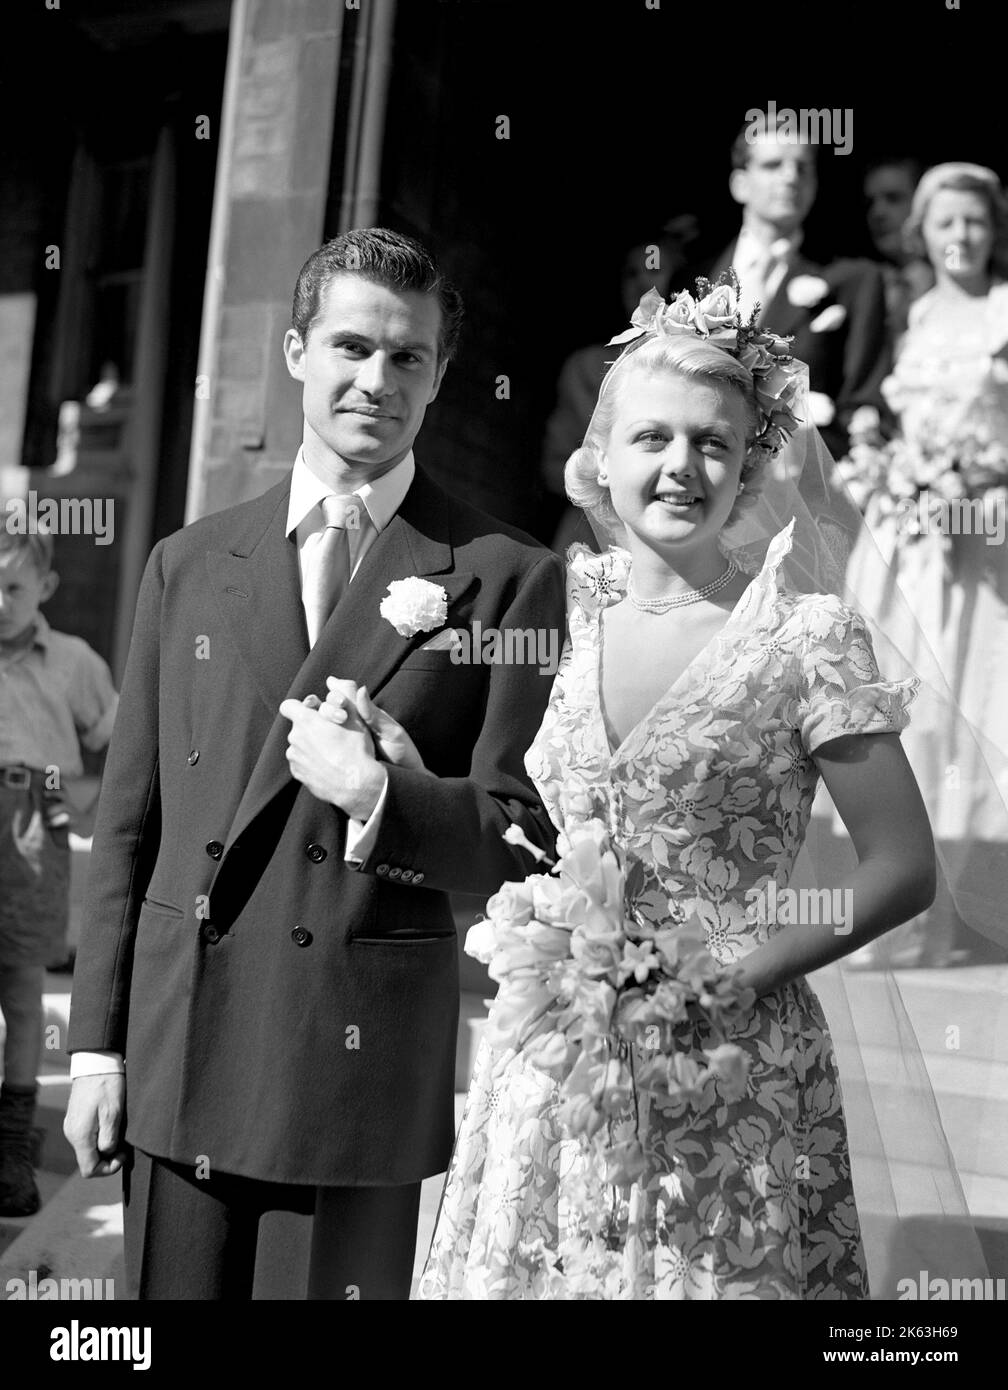 File photo dated 12/08/49 of Angela Lansbury with her husband Peter Shaw after their wedding at St. Columba's Church, London. Angela Lansbury has died at the age of 96 according to a family statement. Stock Photo